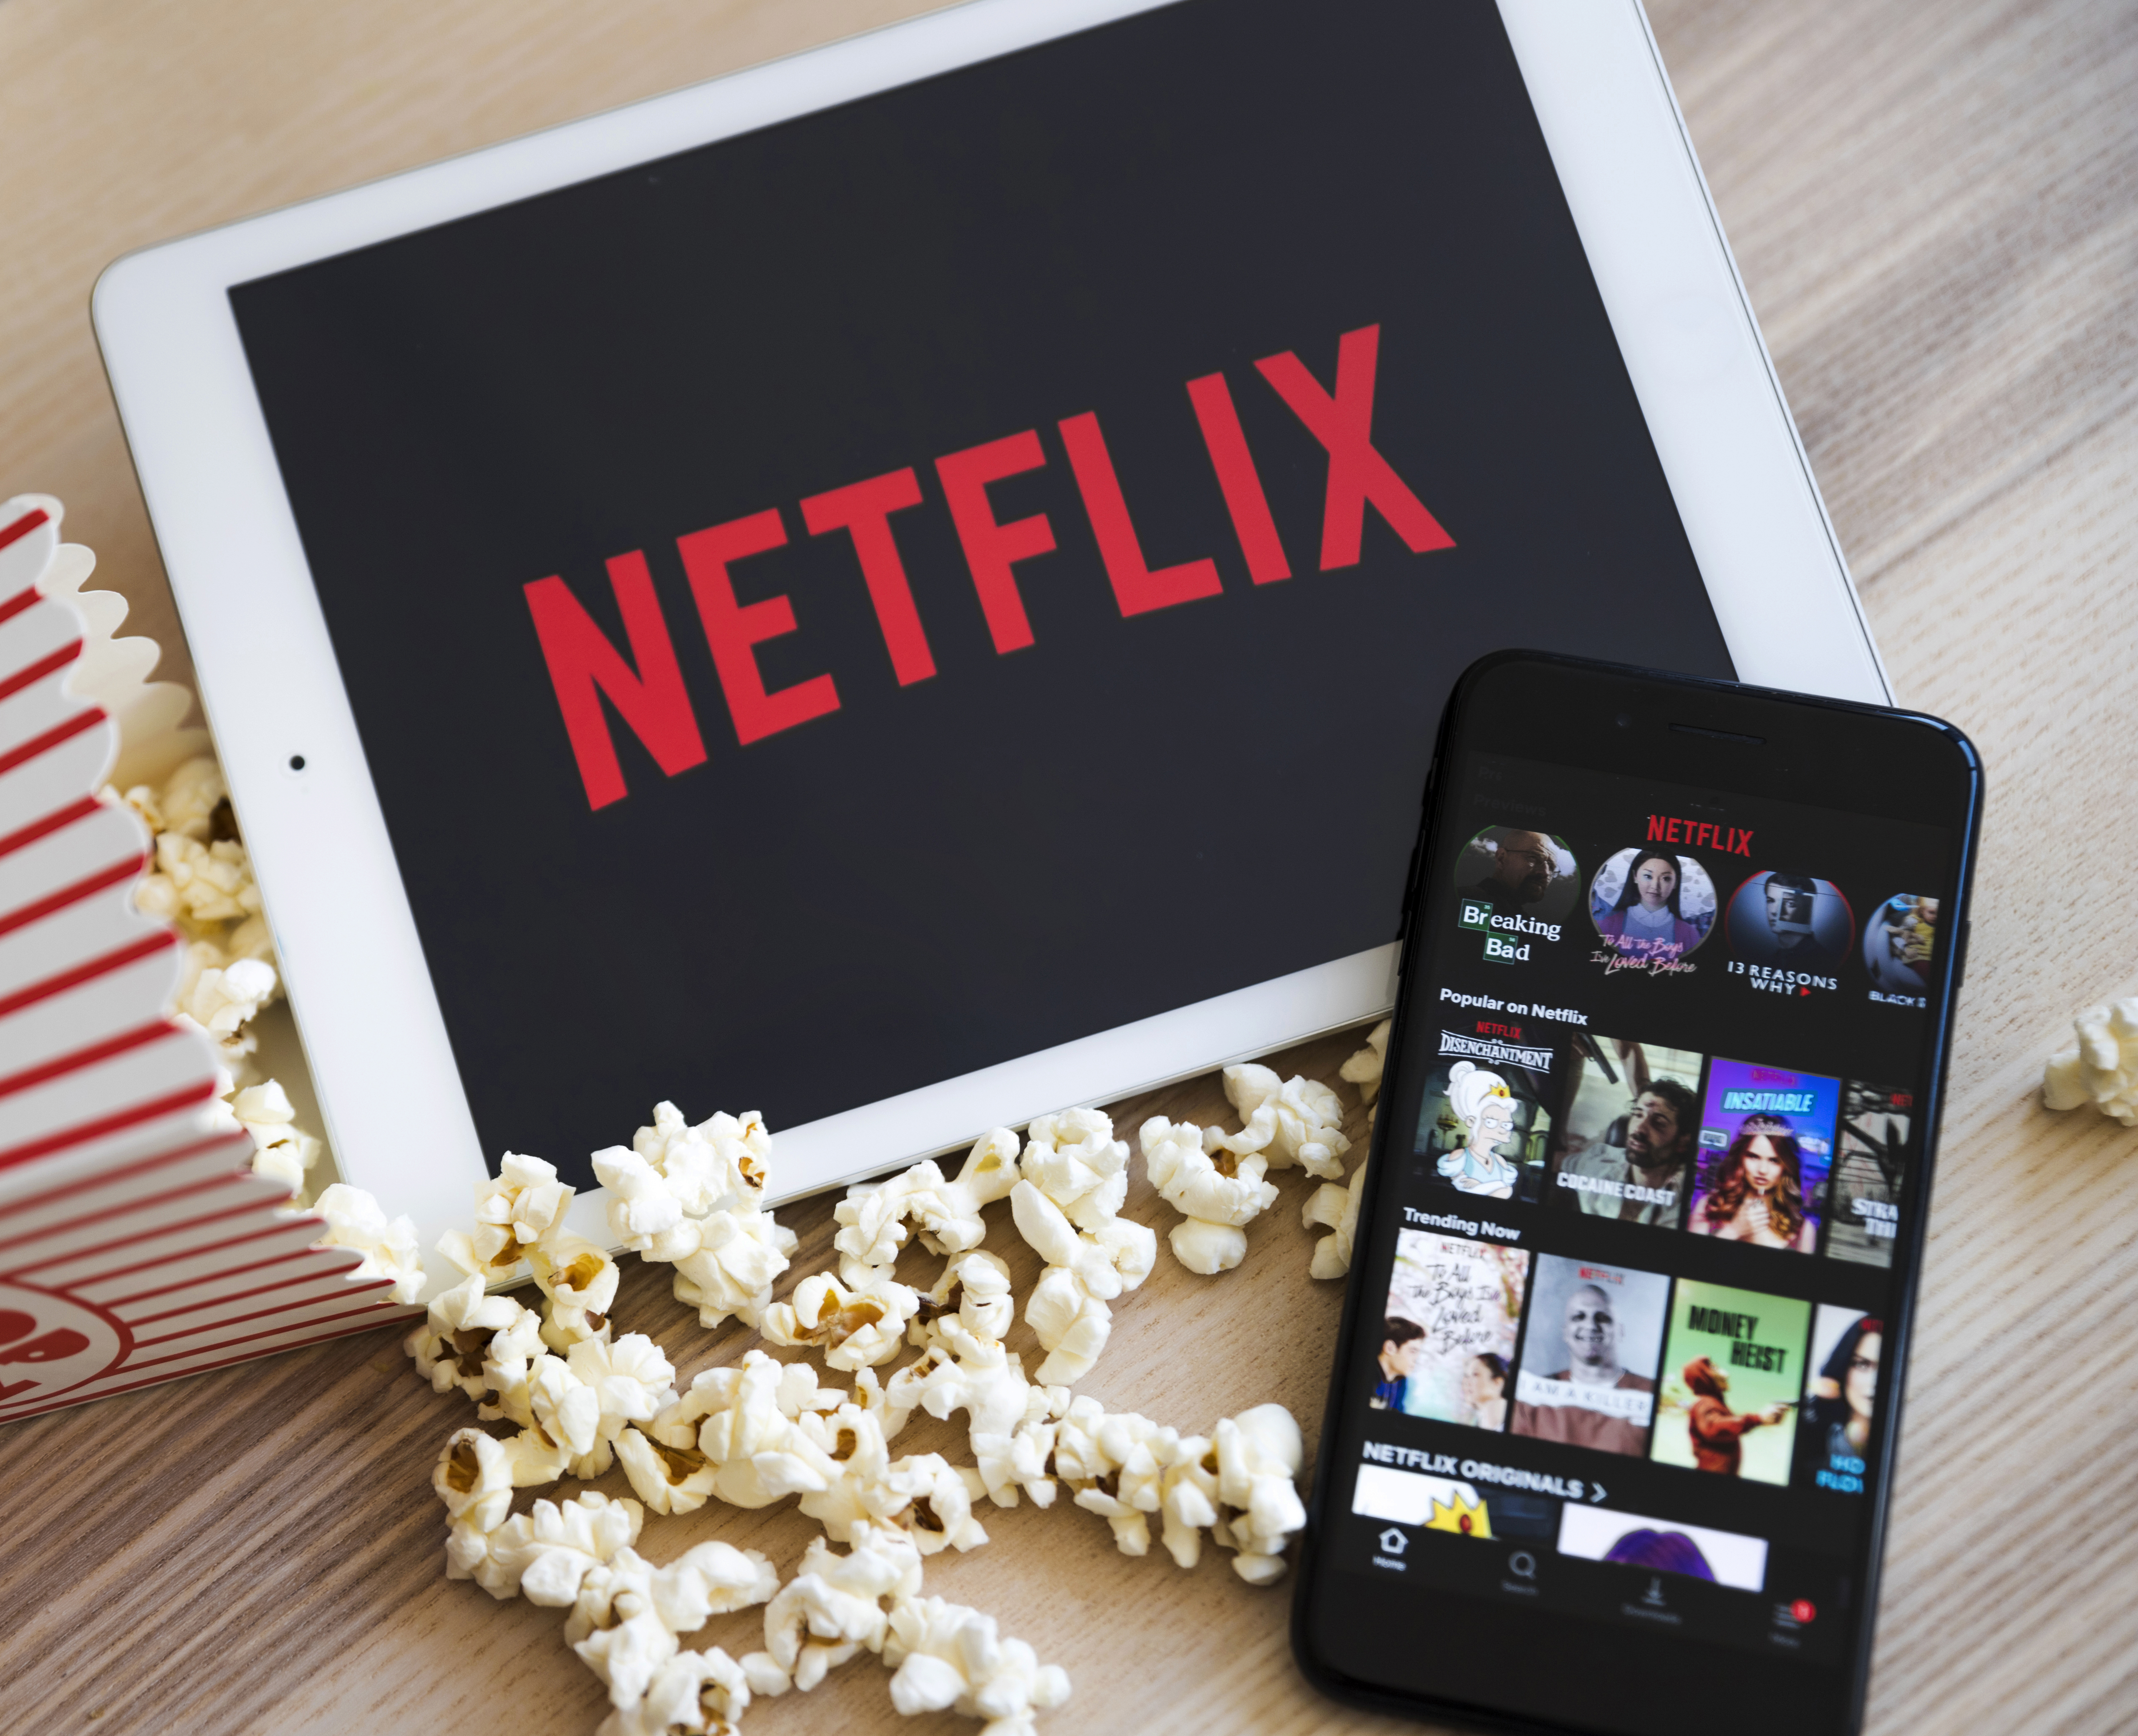 Netflix uses a recommendation system based on your user behavior.